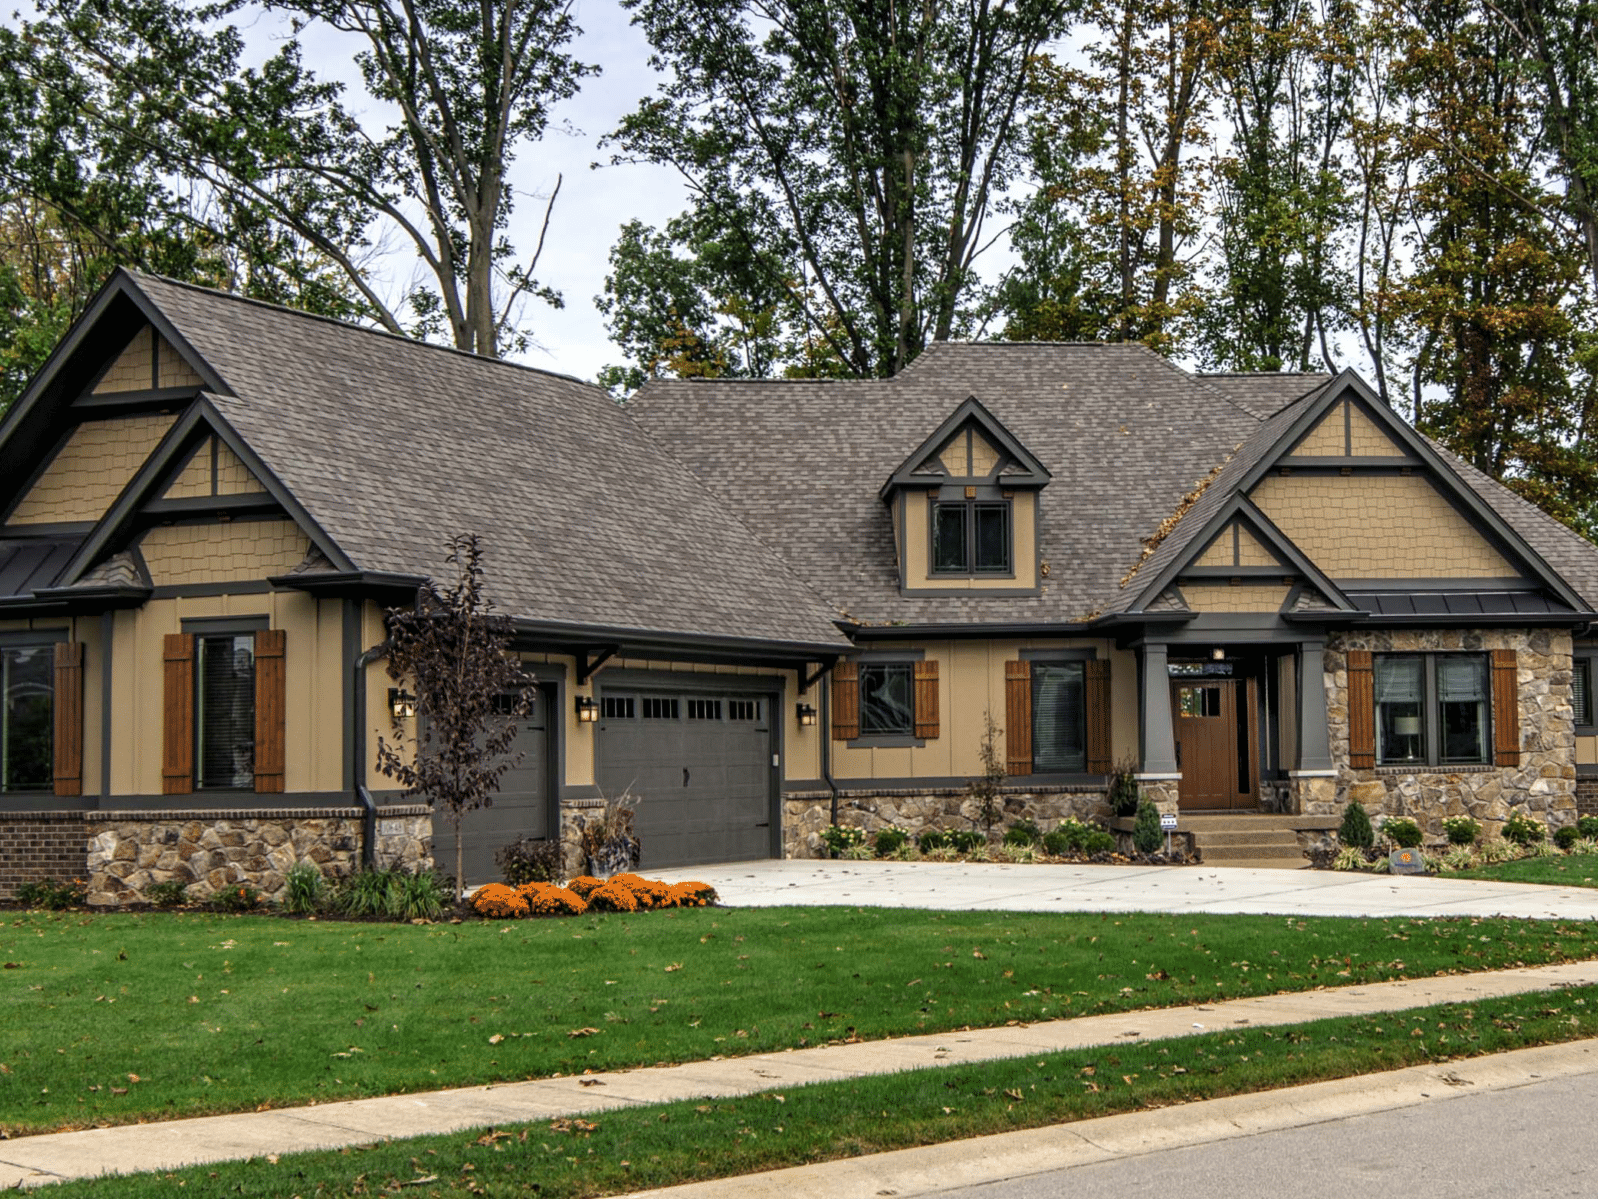 A newly constructed home in Carmel, Indiana with a front porch and a driveway.